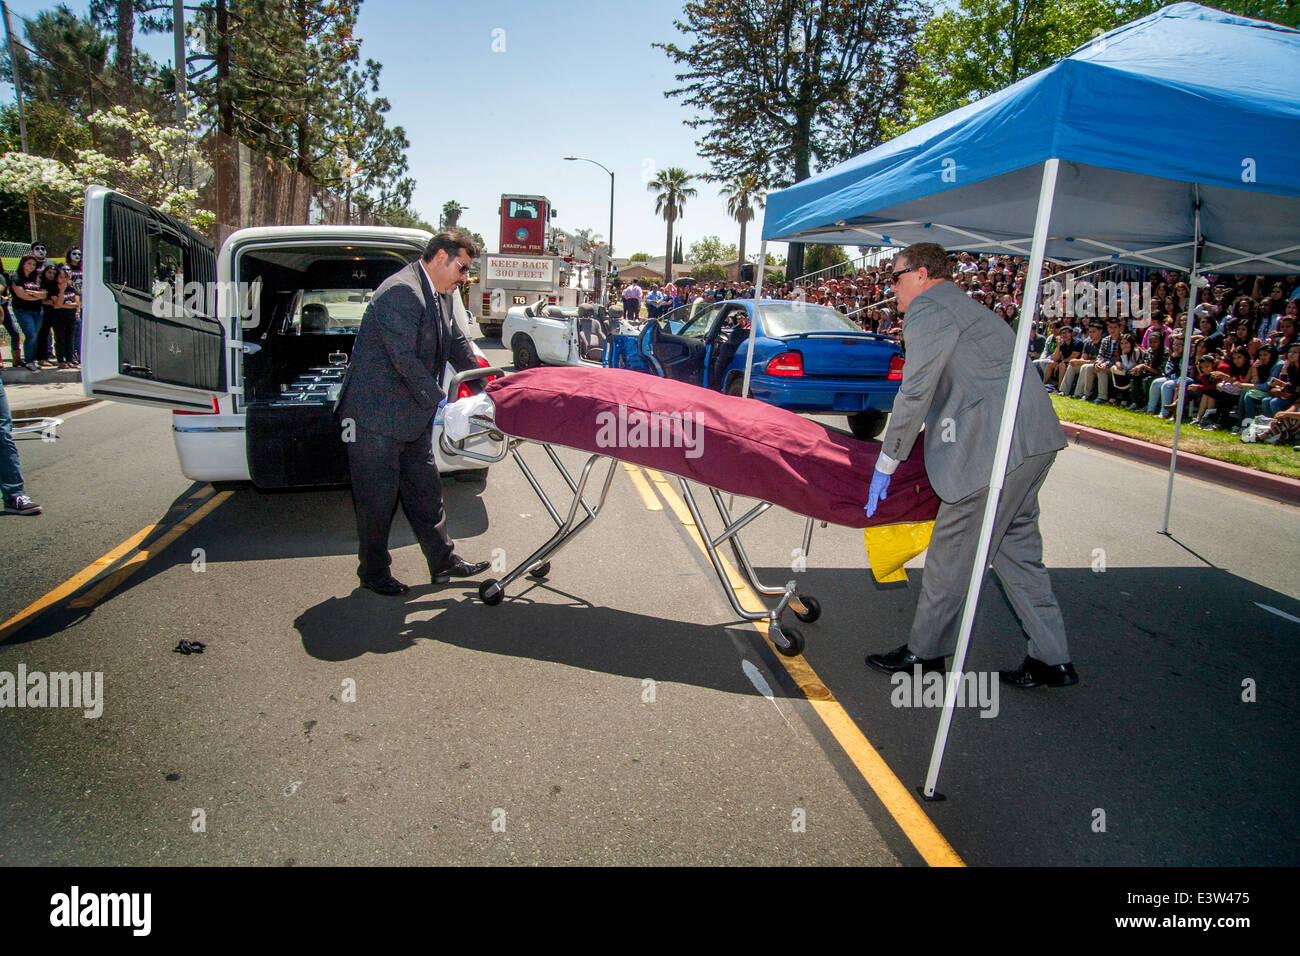 Local volunteer undertakers collect the 'corpse' of an accident victim in a dramatization for a high school audience of the dangers of drunk driving in Anaheim, CA. Note crowd in background. Stock Photo